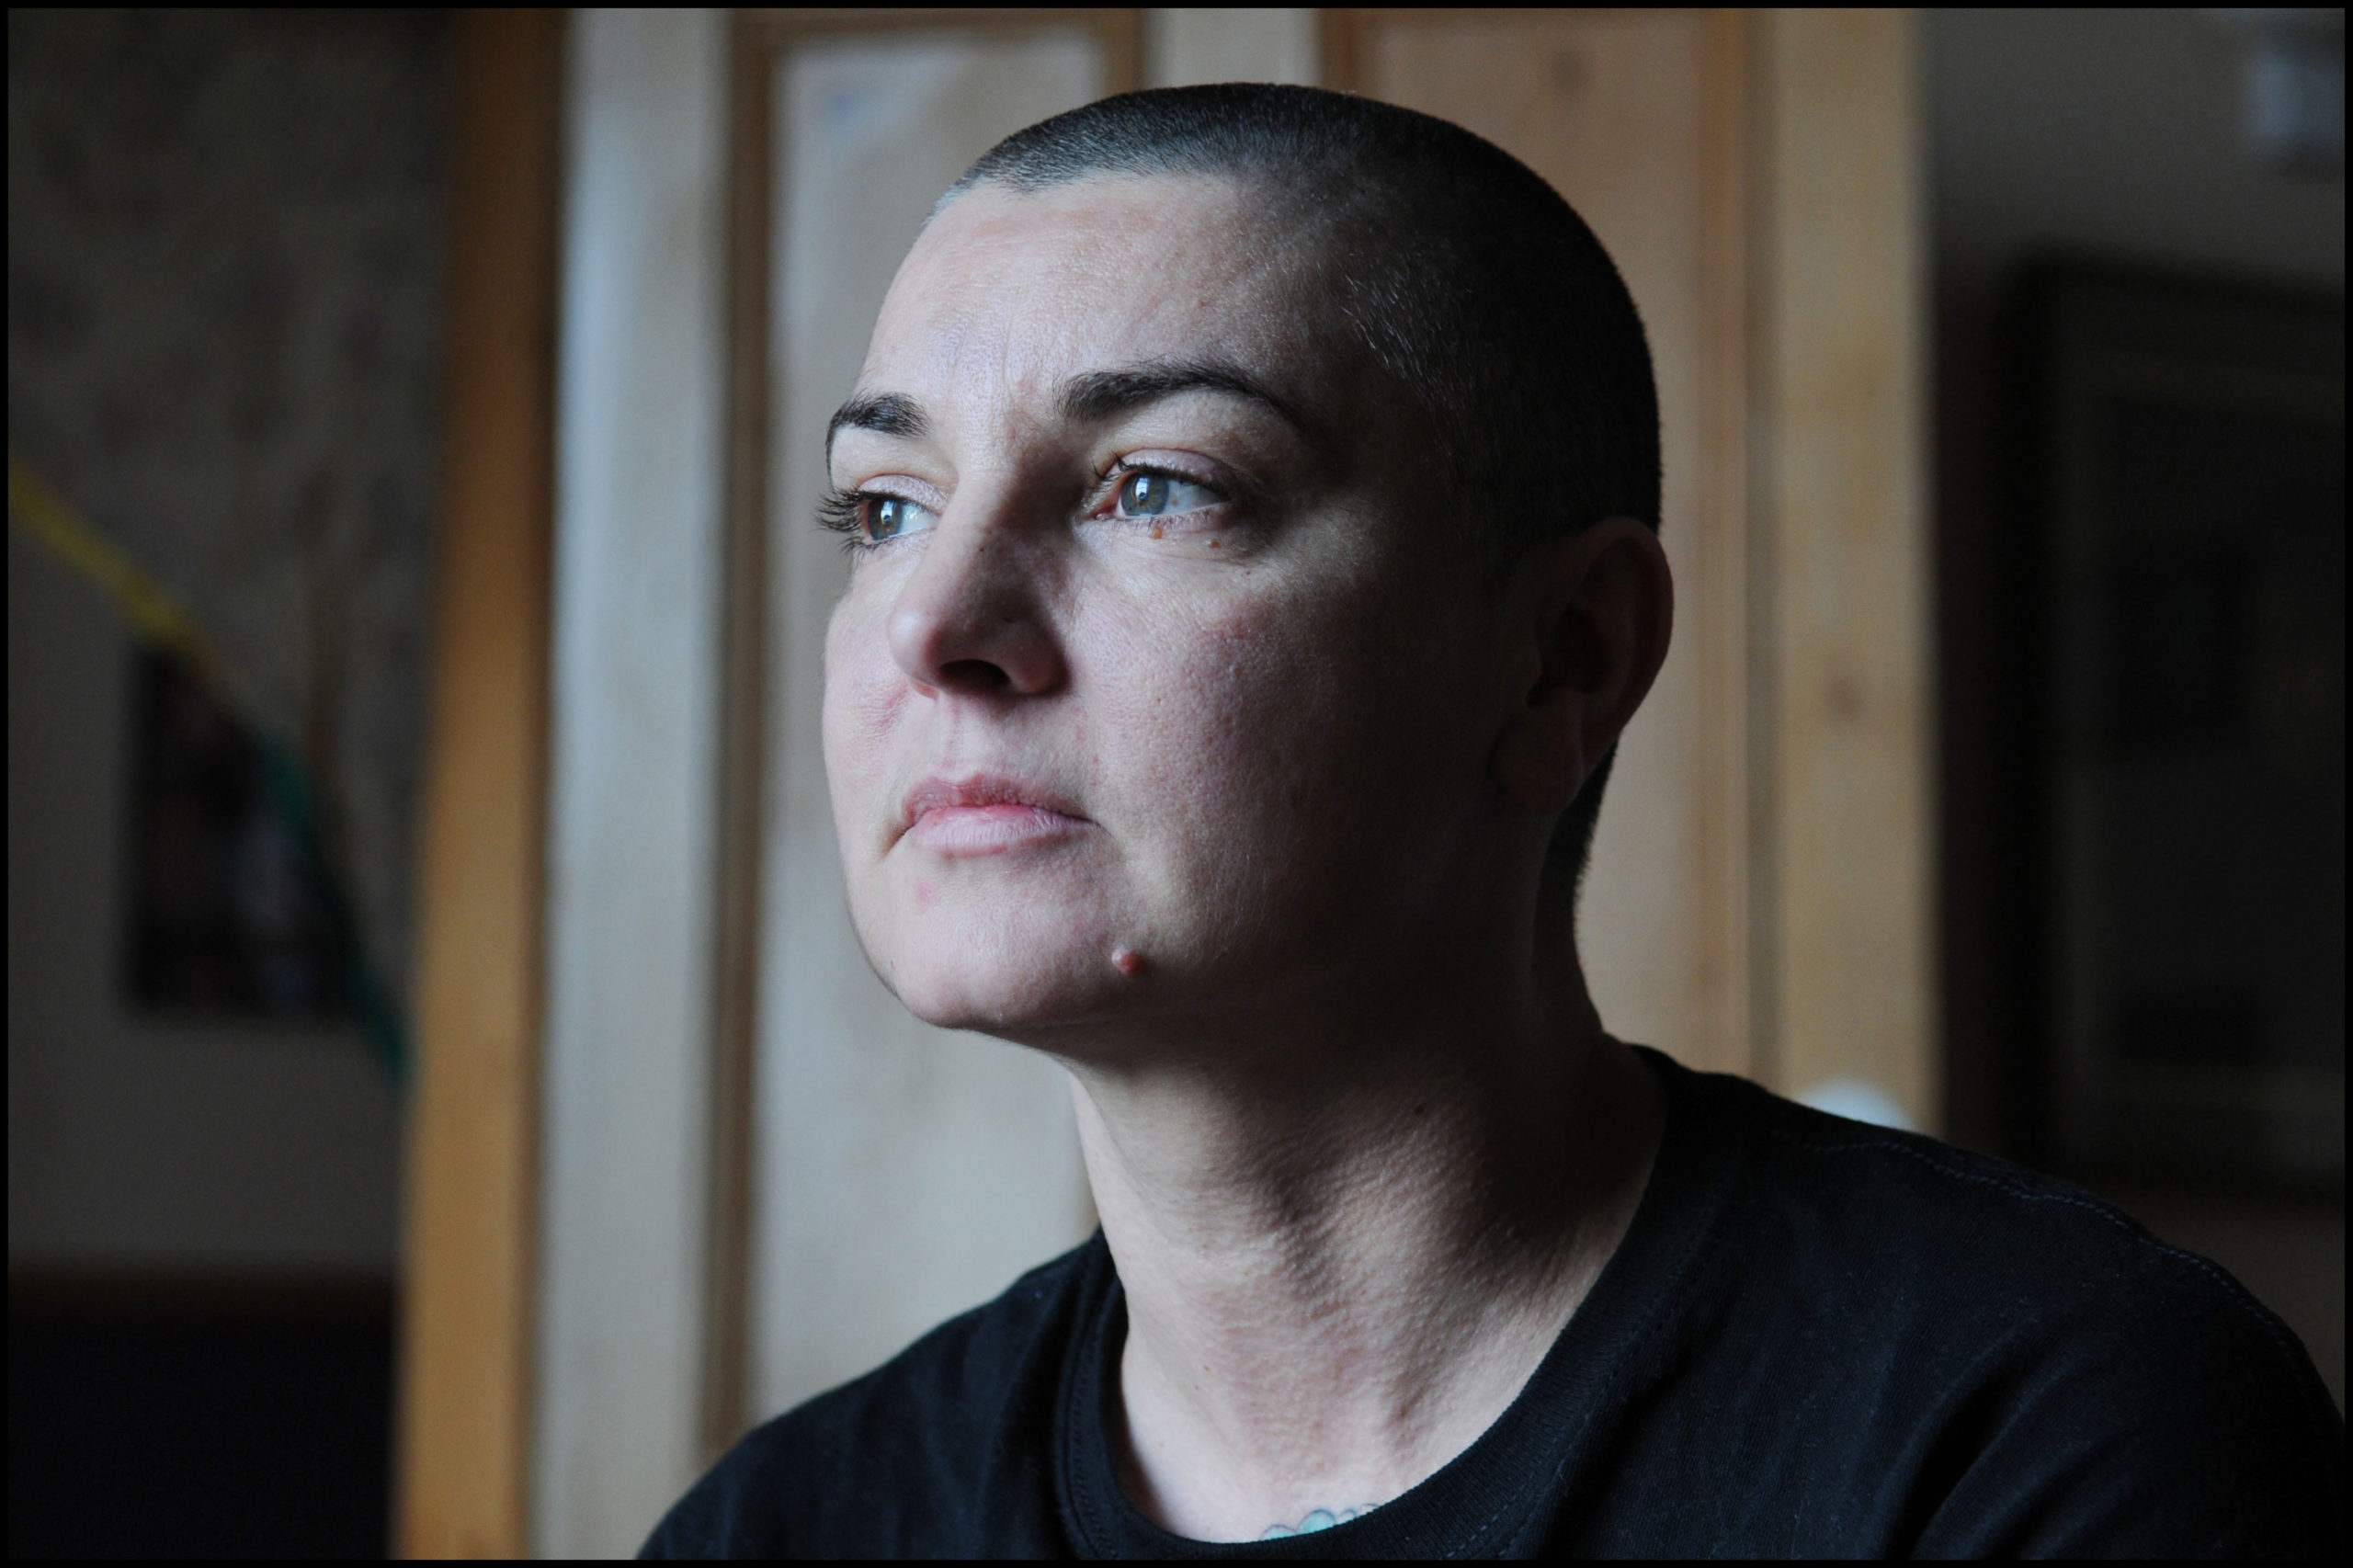 Shane O'Connor, son of Sinead O'Connor, dies at age 17